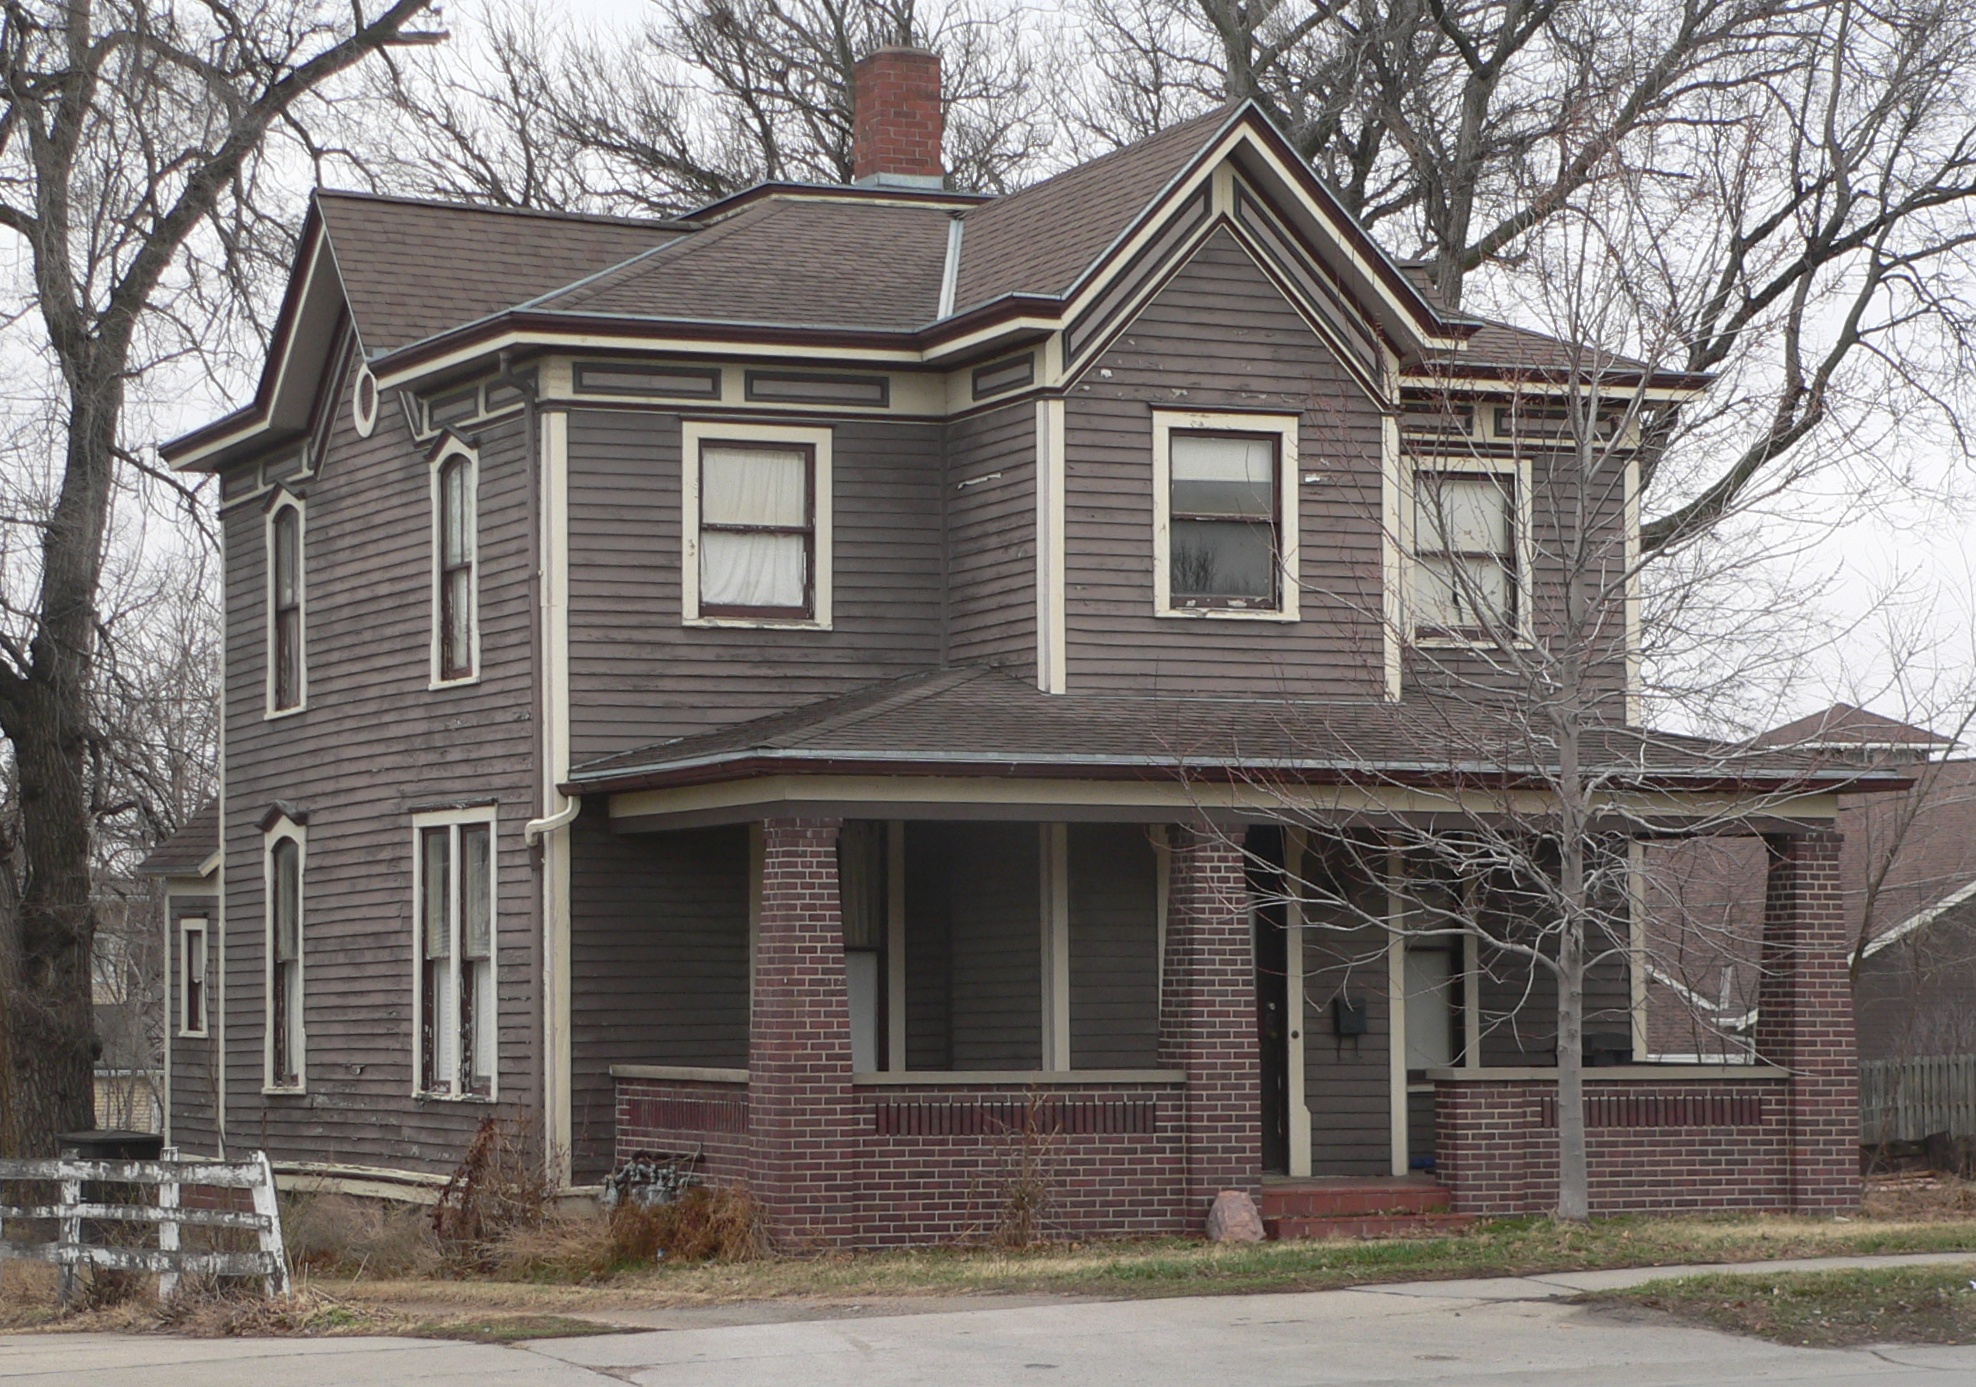 File:Guy A. Brown house from SE 1.JPG - Wikimedia Commons